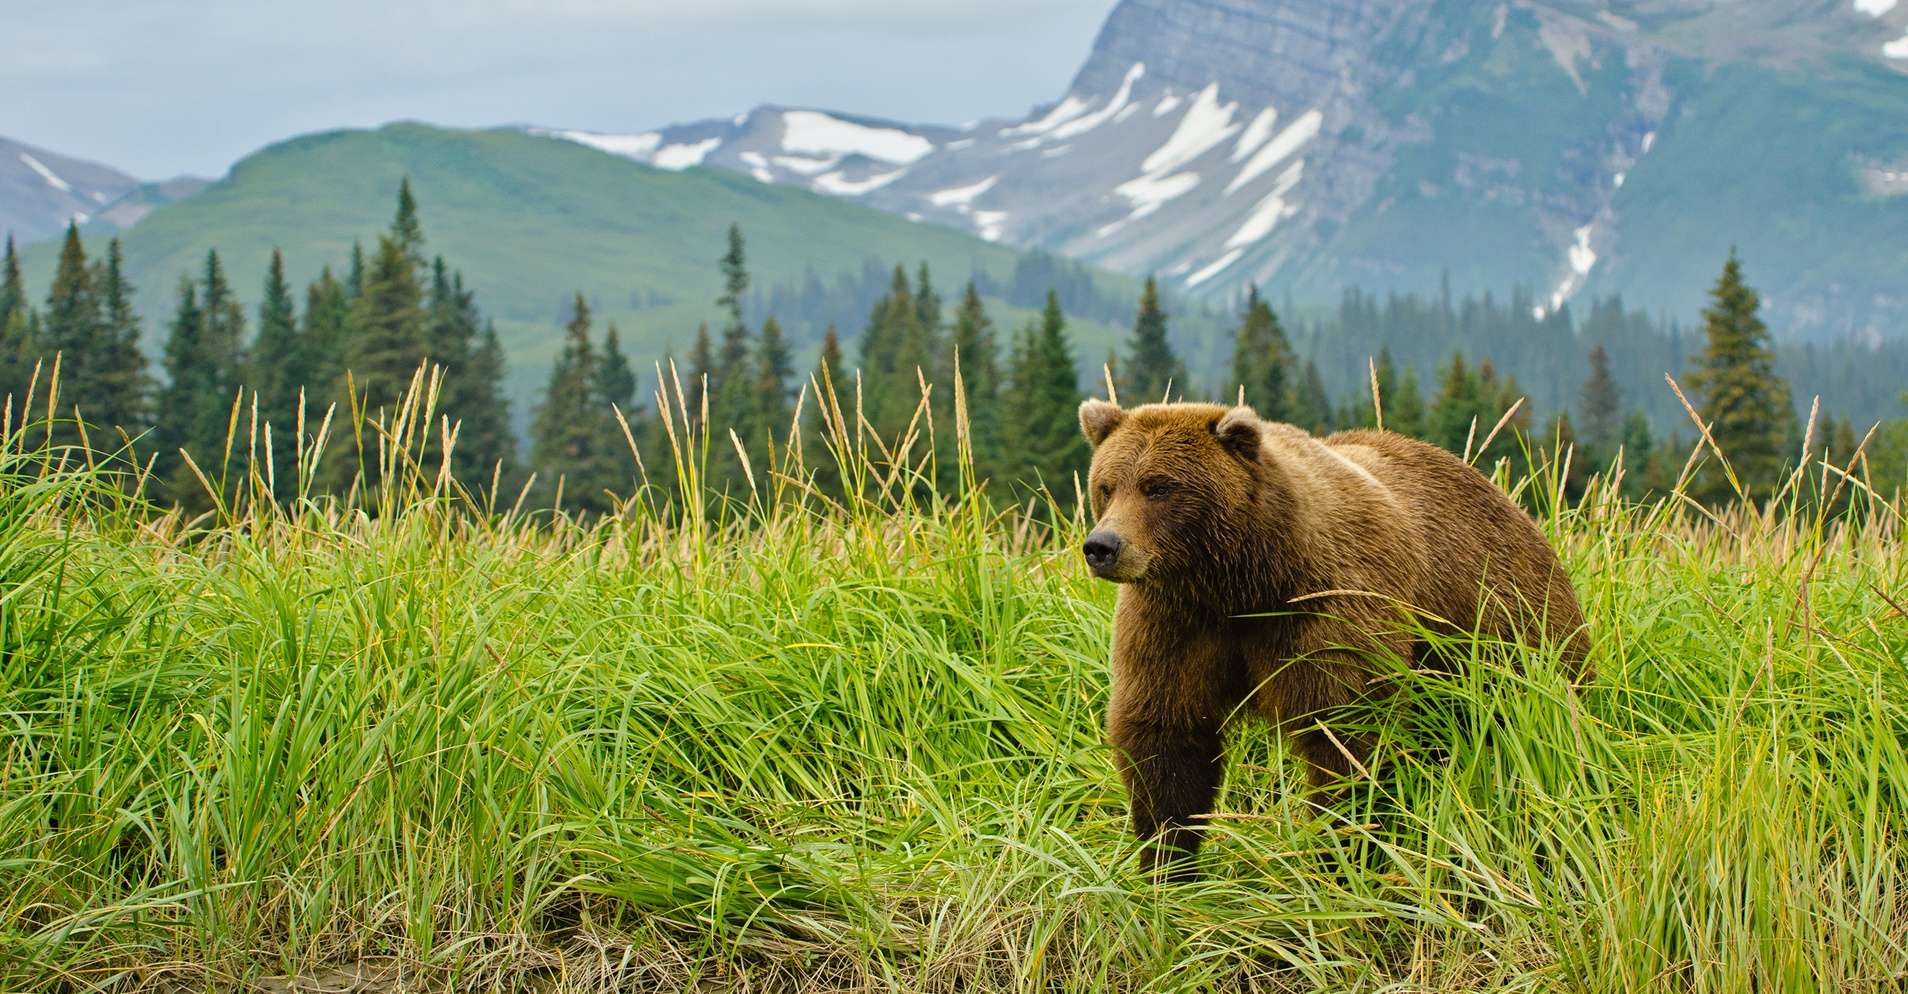 a large brown bear walks out of a grassy meadow with a mountain in the background